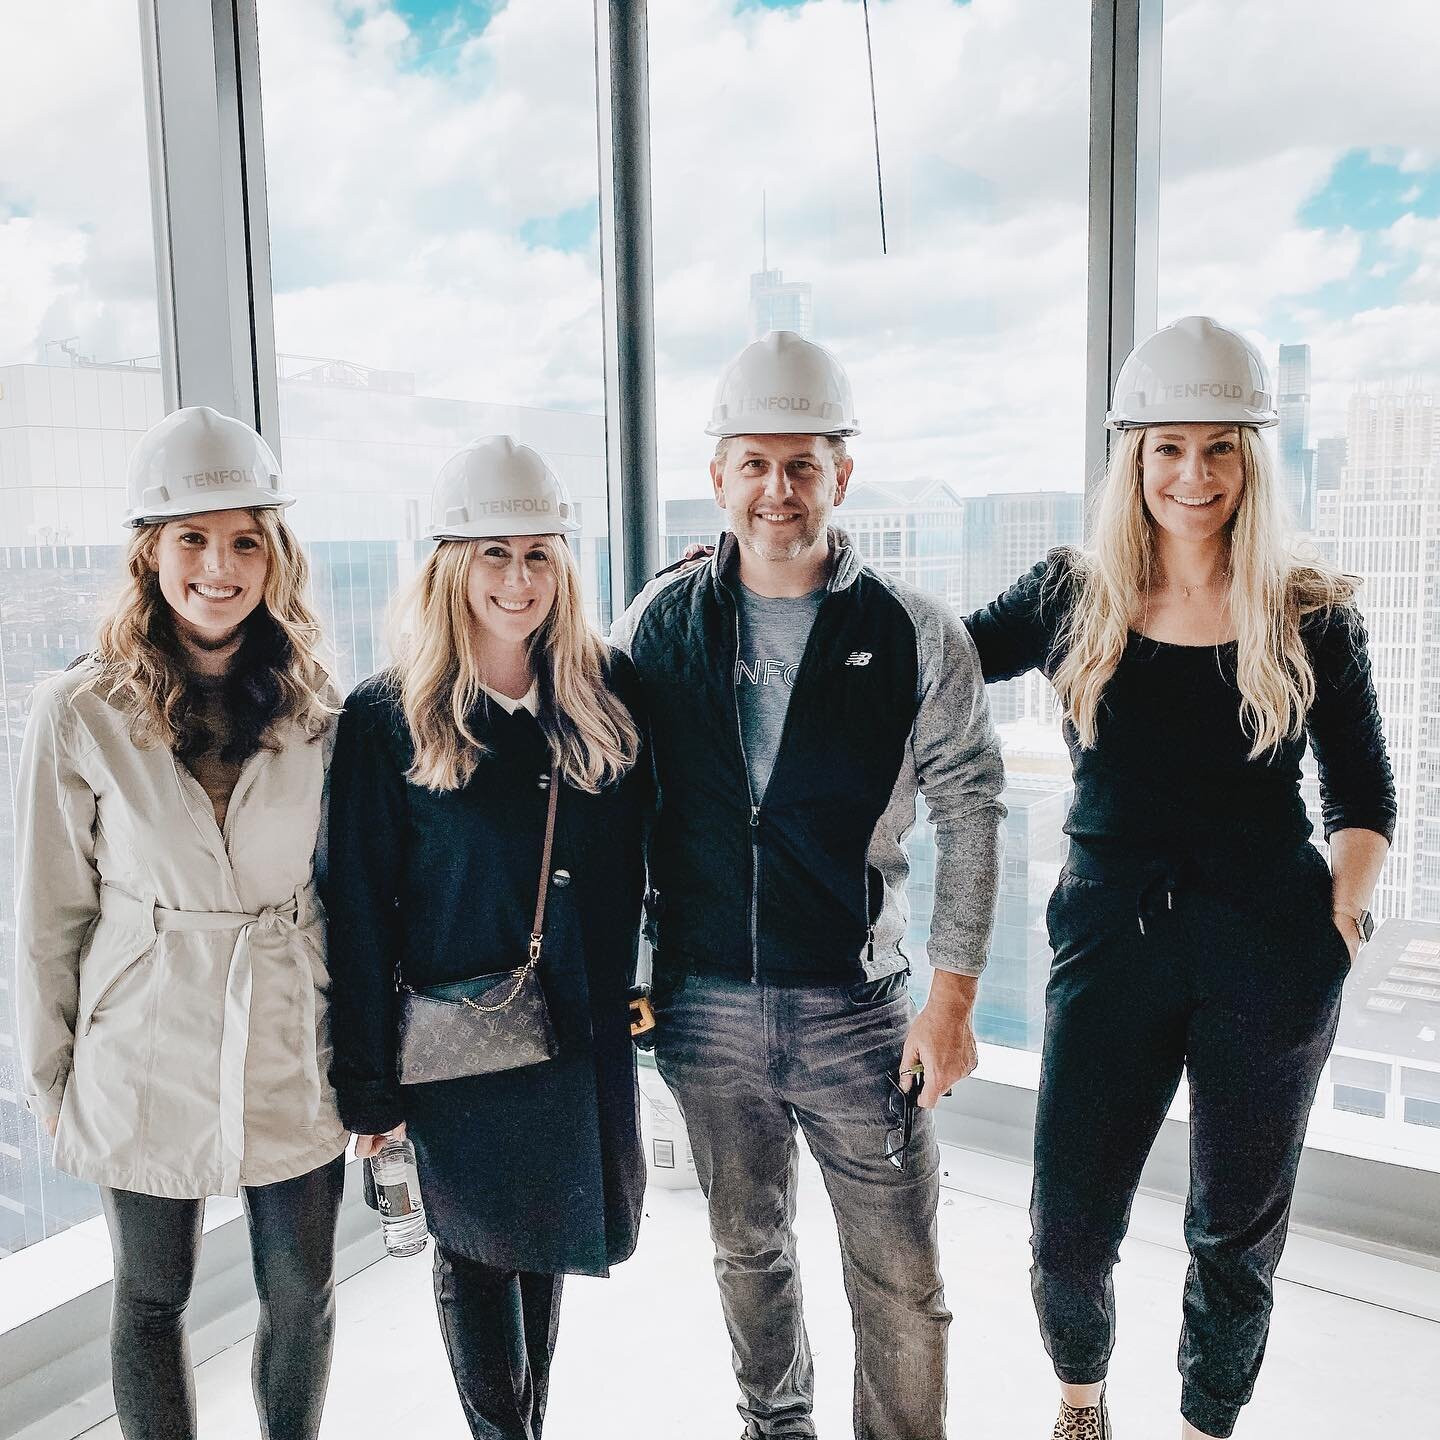 Spending some time on site this week in the Windy City &mdash; it is always so exciting when a project begins to transform from rendering into reality. ✨

#teamTENFOLD #Chicago #brandedspaces